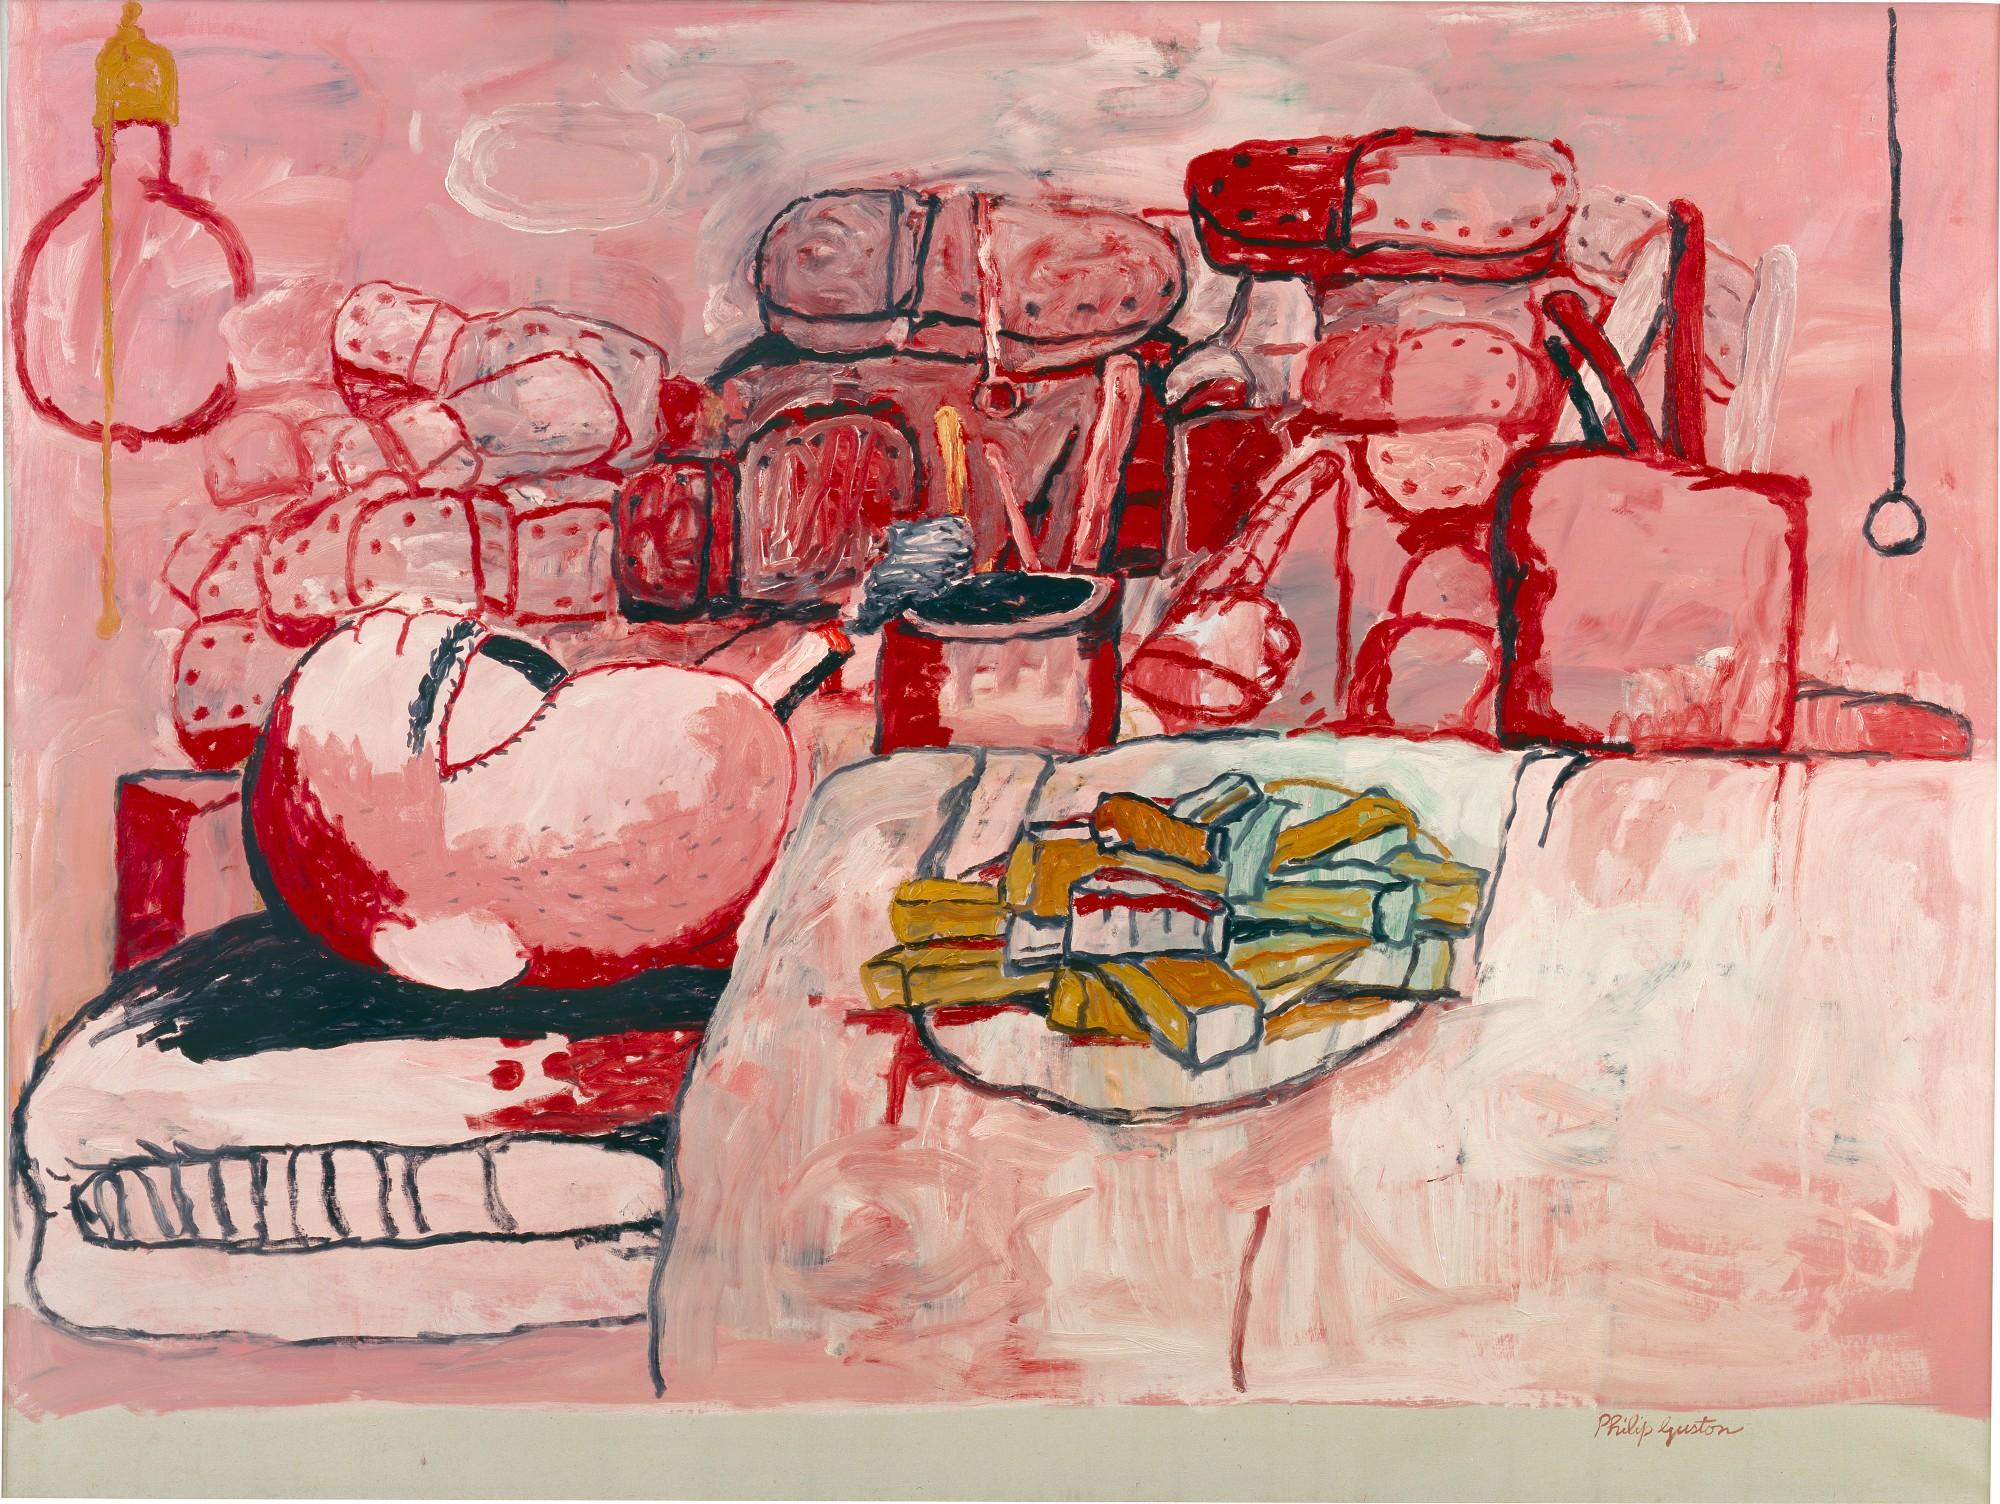 Philip Guston: A Lived Through Art | Art & Object